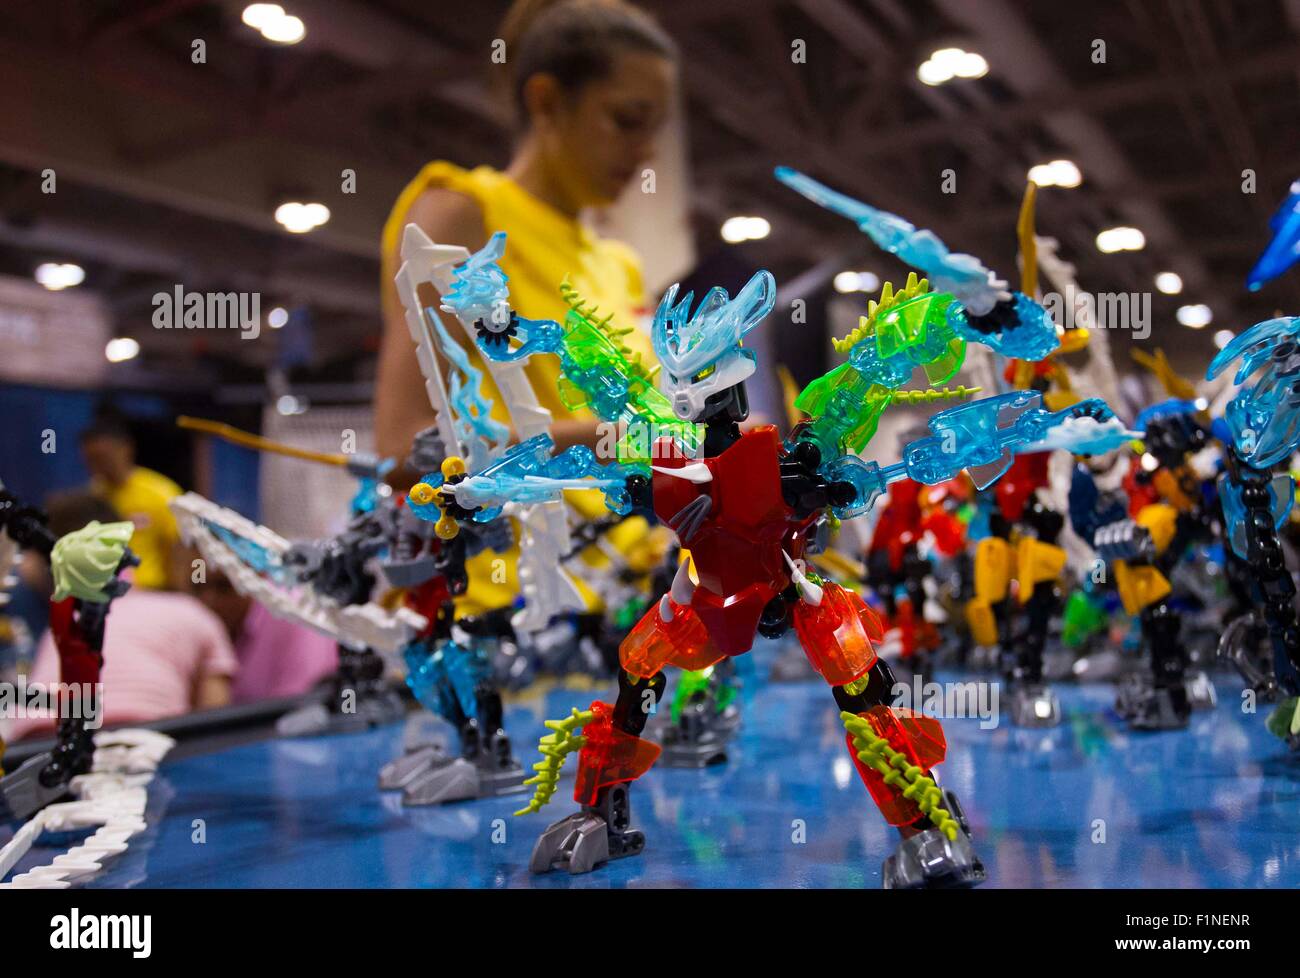 Toronto. 4th Sep, 2015. People visit the 2015 Fan Expo Canada event at the Metro Toronto Convention Center in Toronto Sept. 4, 2015. The four-day 2015 Fan Expo Canada event, opened on Sept. 3, is one of the largest events of its kind in North America. © Zou Zheng/Xinhua/Alamy Live News Stock Photo